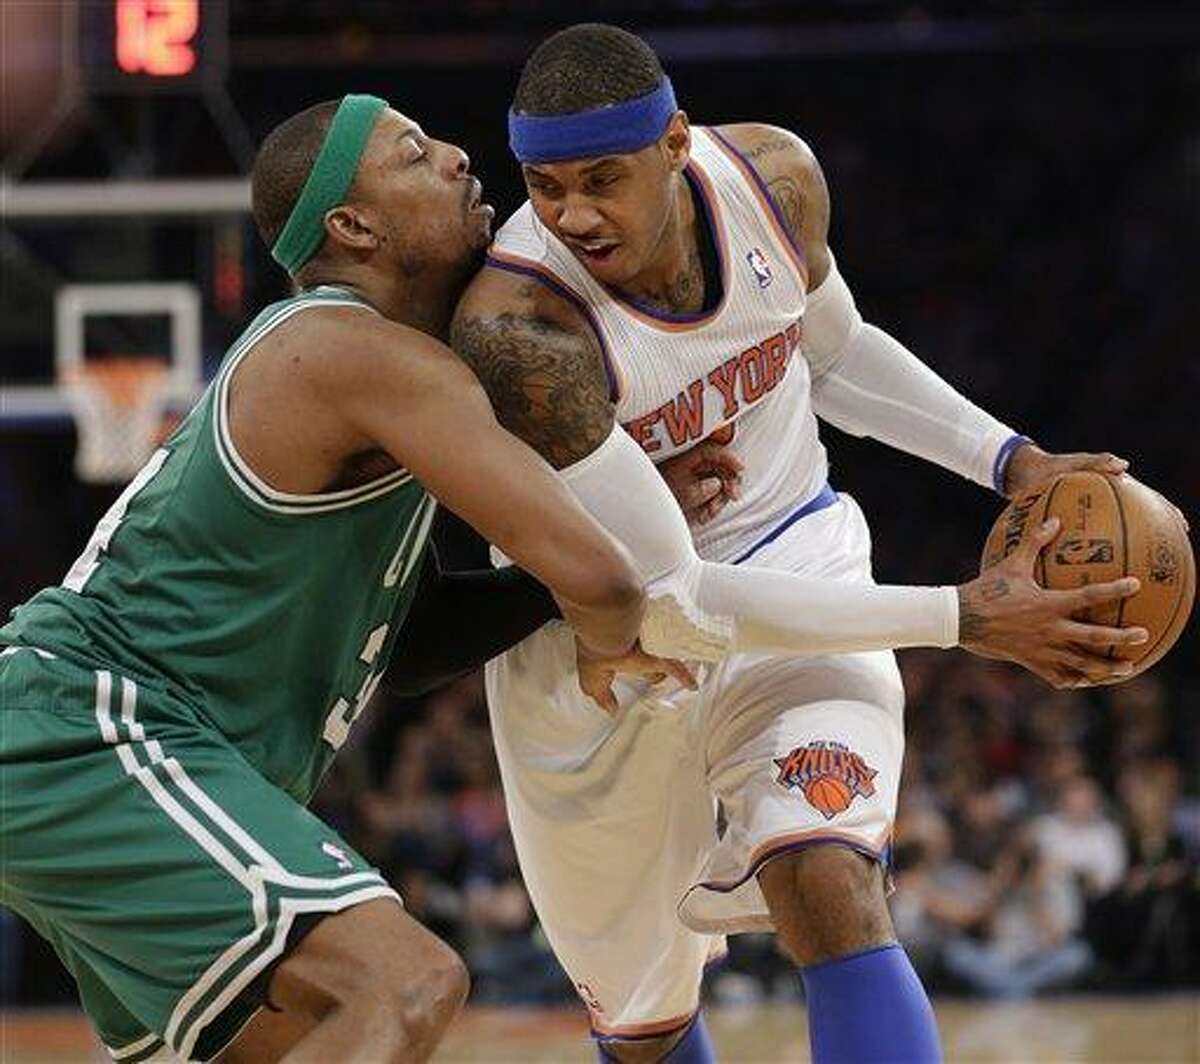 Boston Celtics forward Paul Pierce (34) defends as New York Knicks forward Carmelo Anthony (7) tries to drive around him in the first half of Game 2 of their first-round NBA basketball playoff series in New York, Tuesday, April 23, 2013. The Knicks went up 2-0 in the series, defeating the Celtics 87-71. (AP Photo/Kathy Willens)